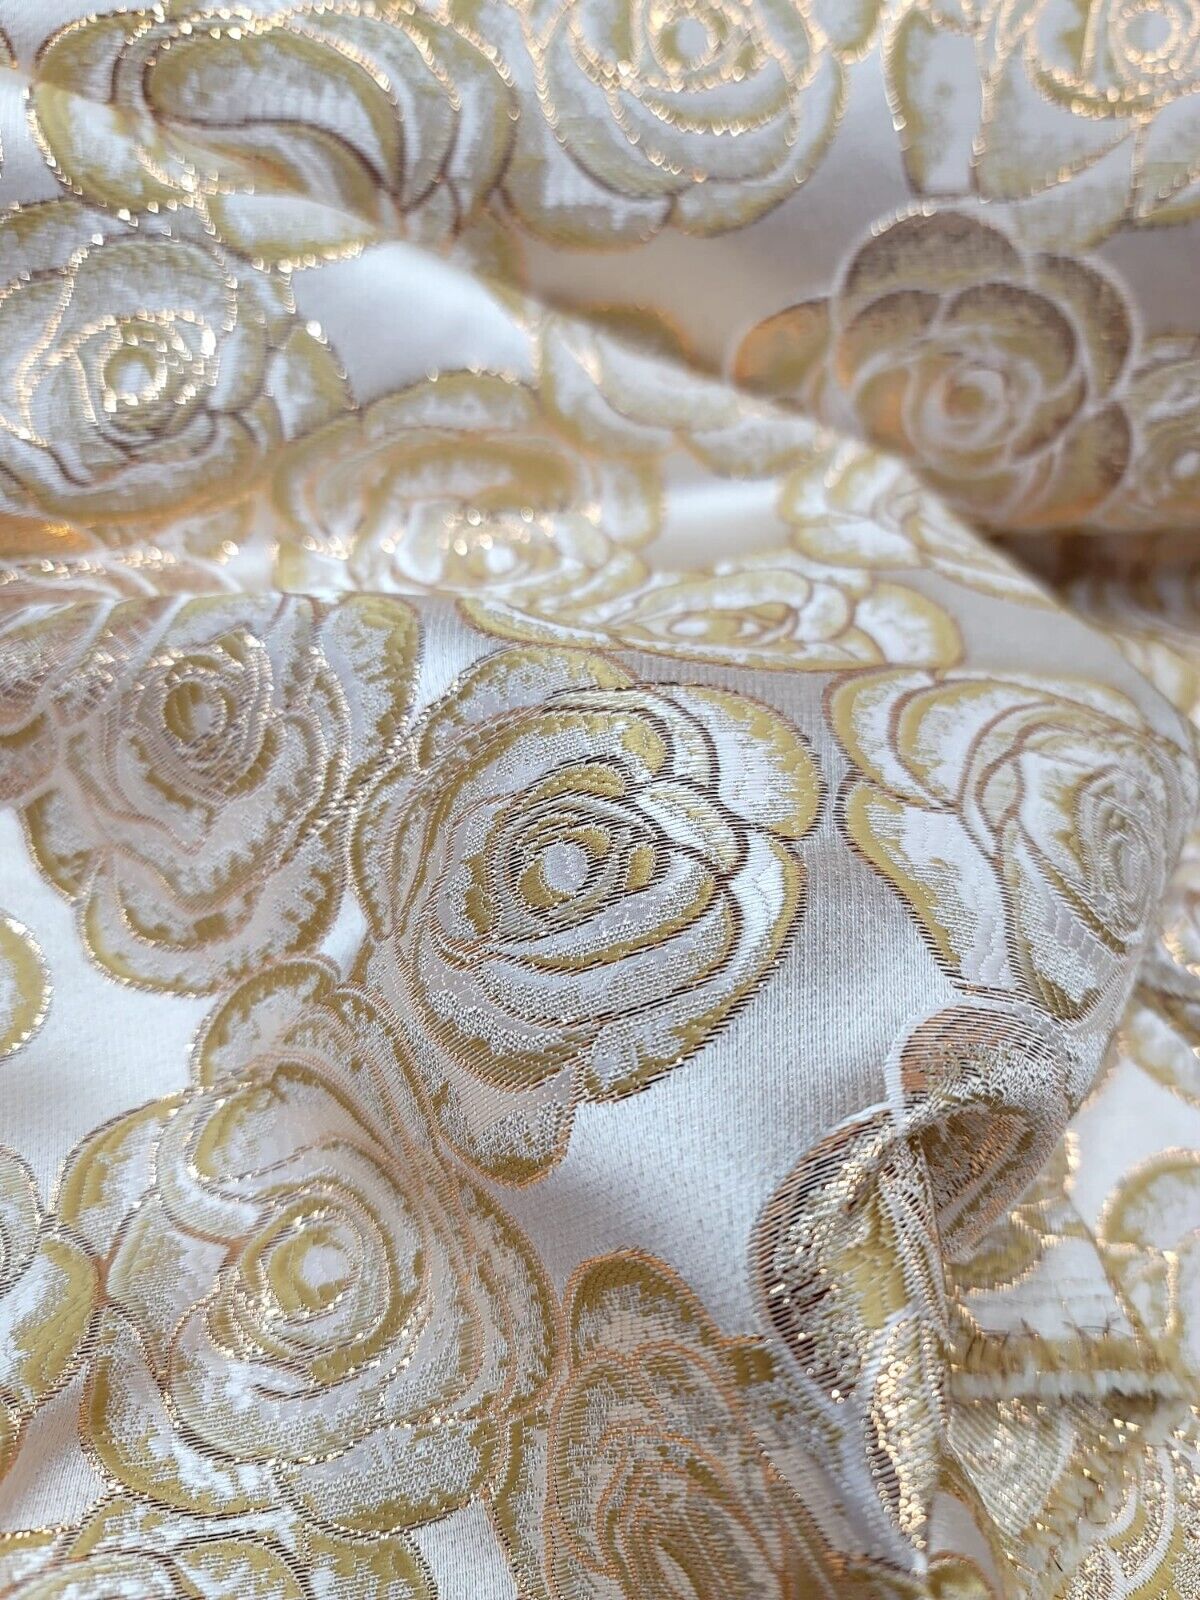 BEIGE GOLD Floral Brocade Fabric (60 in.) Sold By The Yard TEXTURED METALLIC